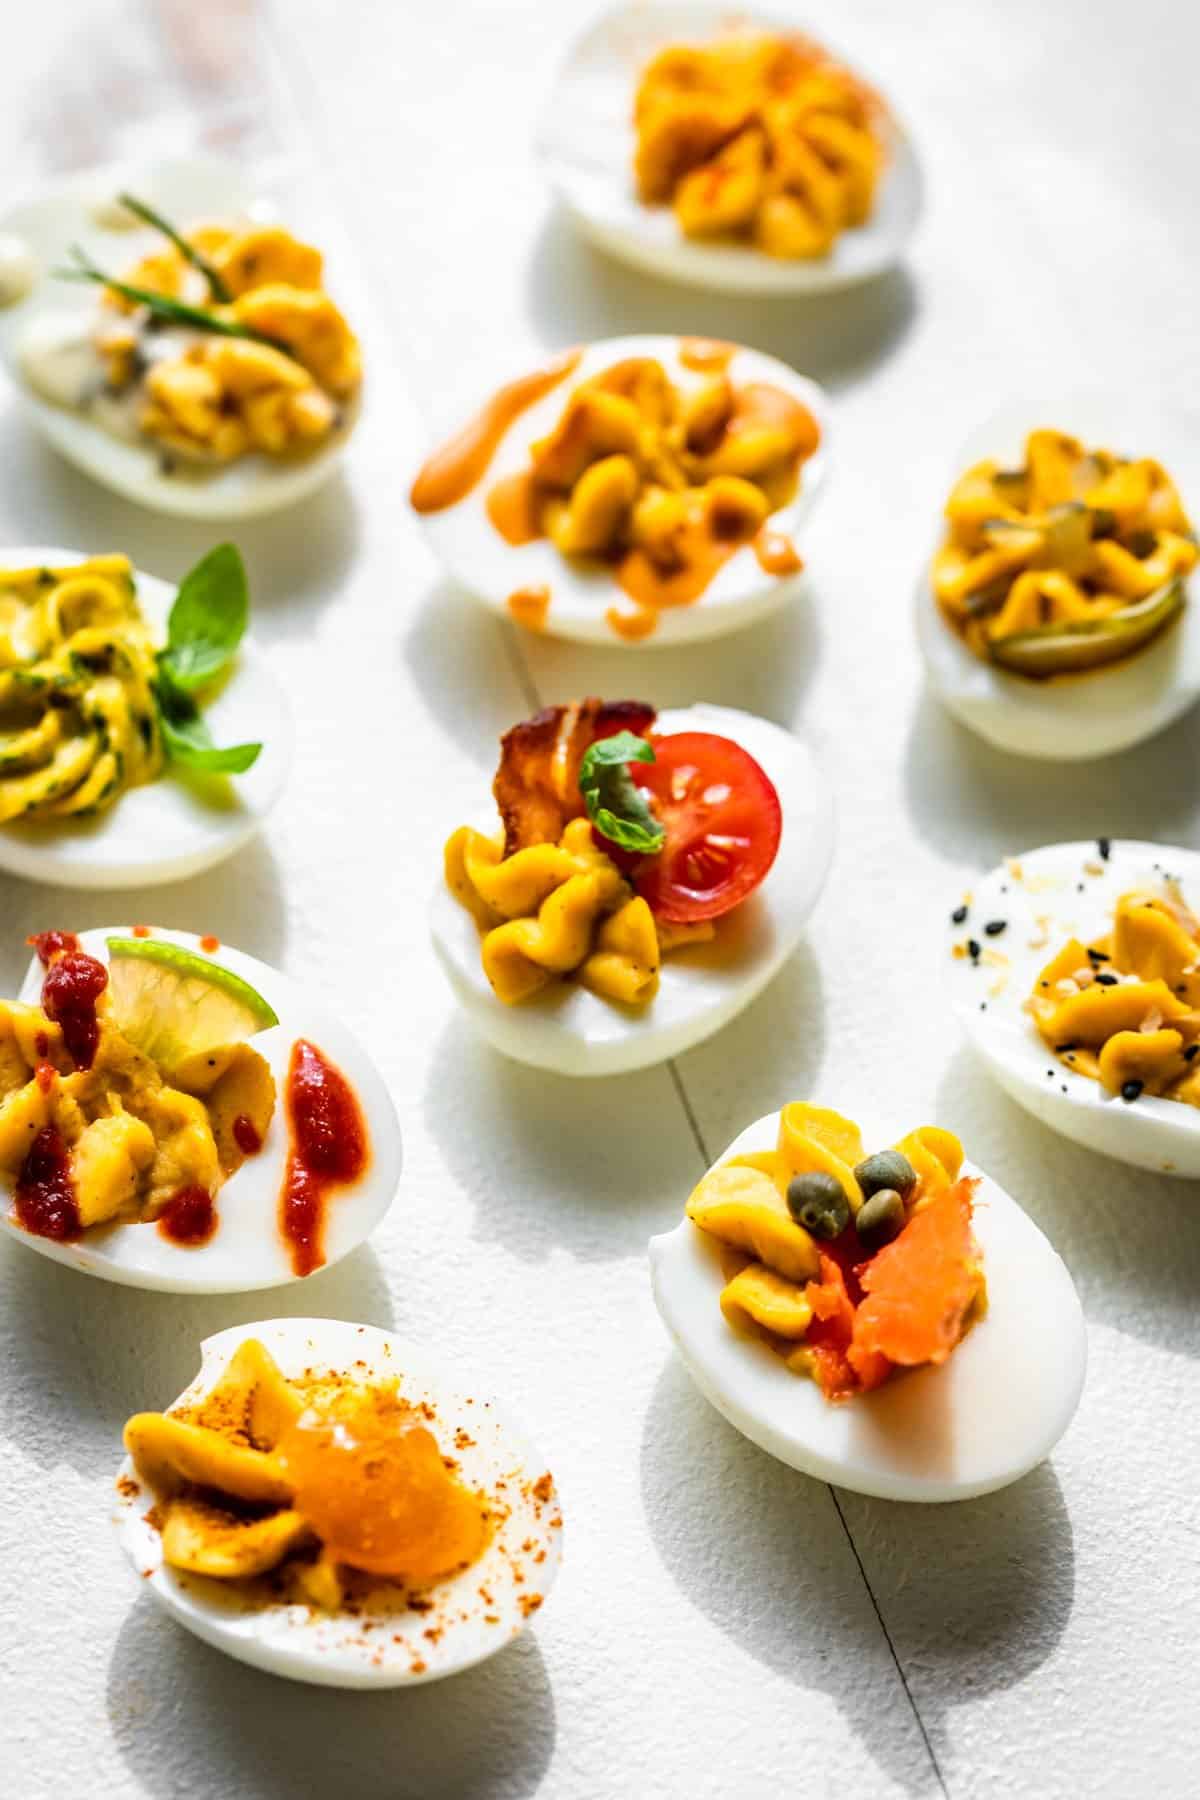 Side view of all ten deviled eggs flavors on a white background.